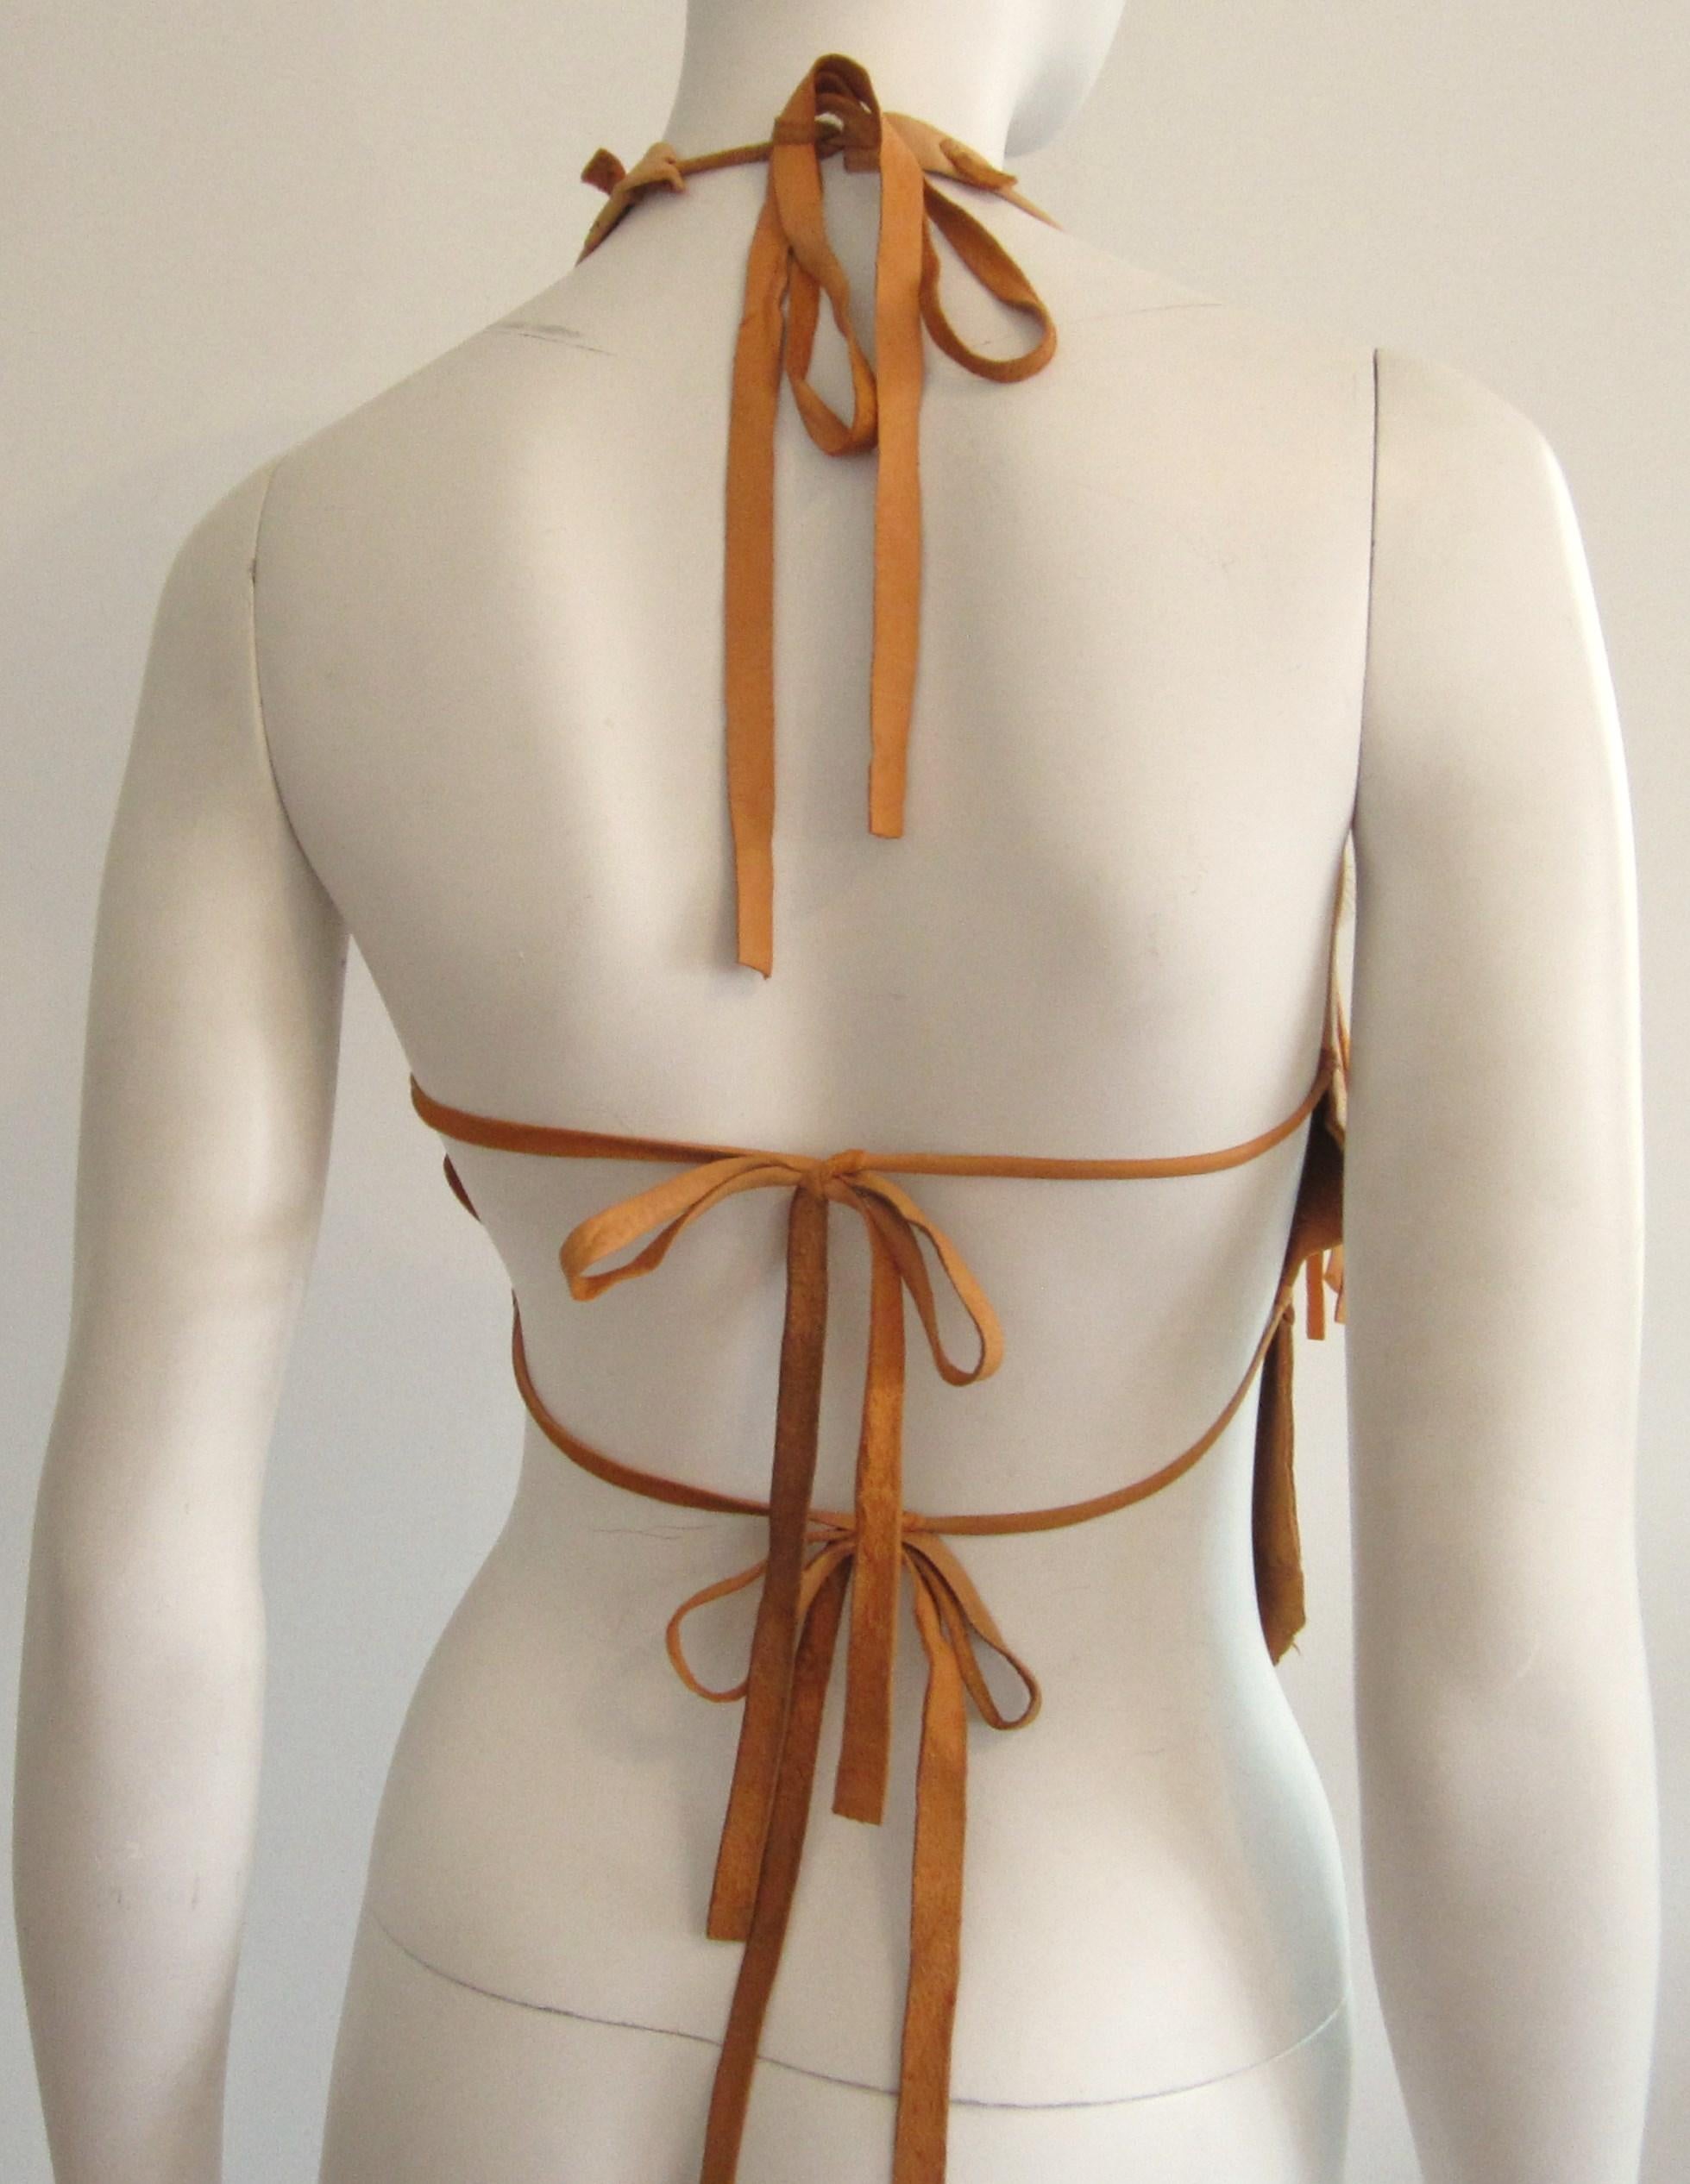 Deerskin Leather Halter Top Handmade Feathers 1970s In Good Condition For Sale In Wallkill, NY